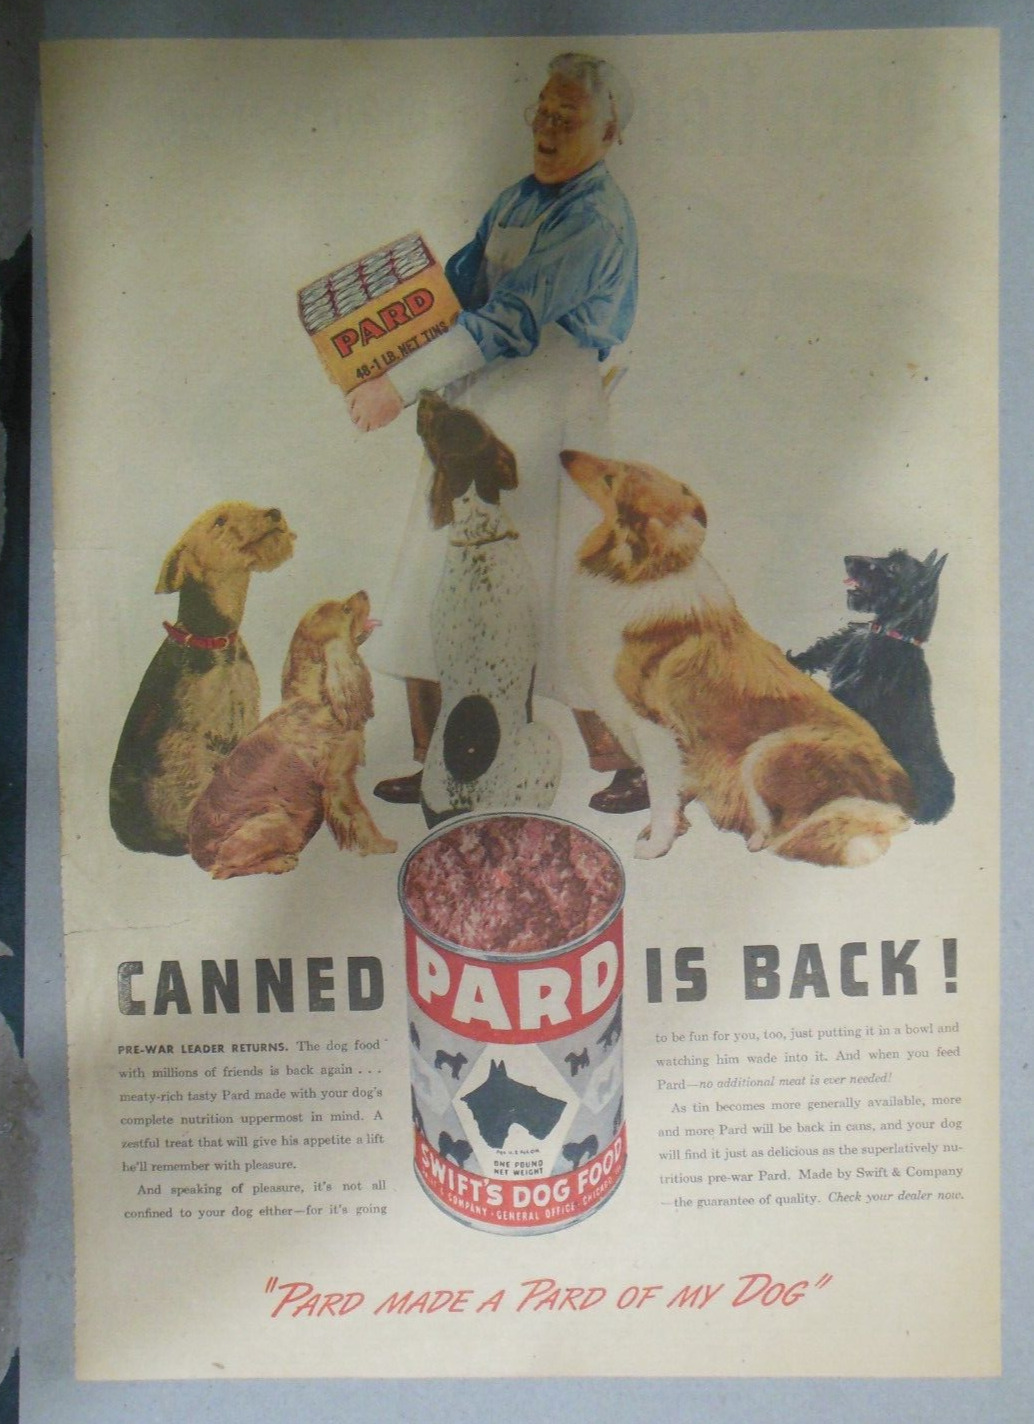 Pard Dog Food Ad: Canned Pard is Back  from 1947 Size: 11 x 15 inches